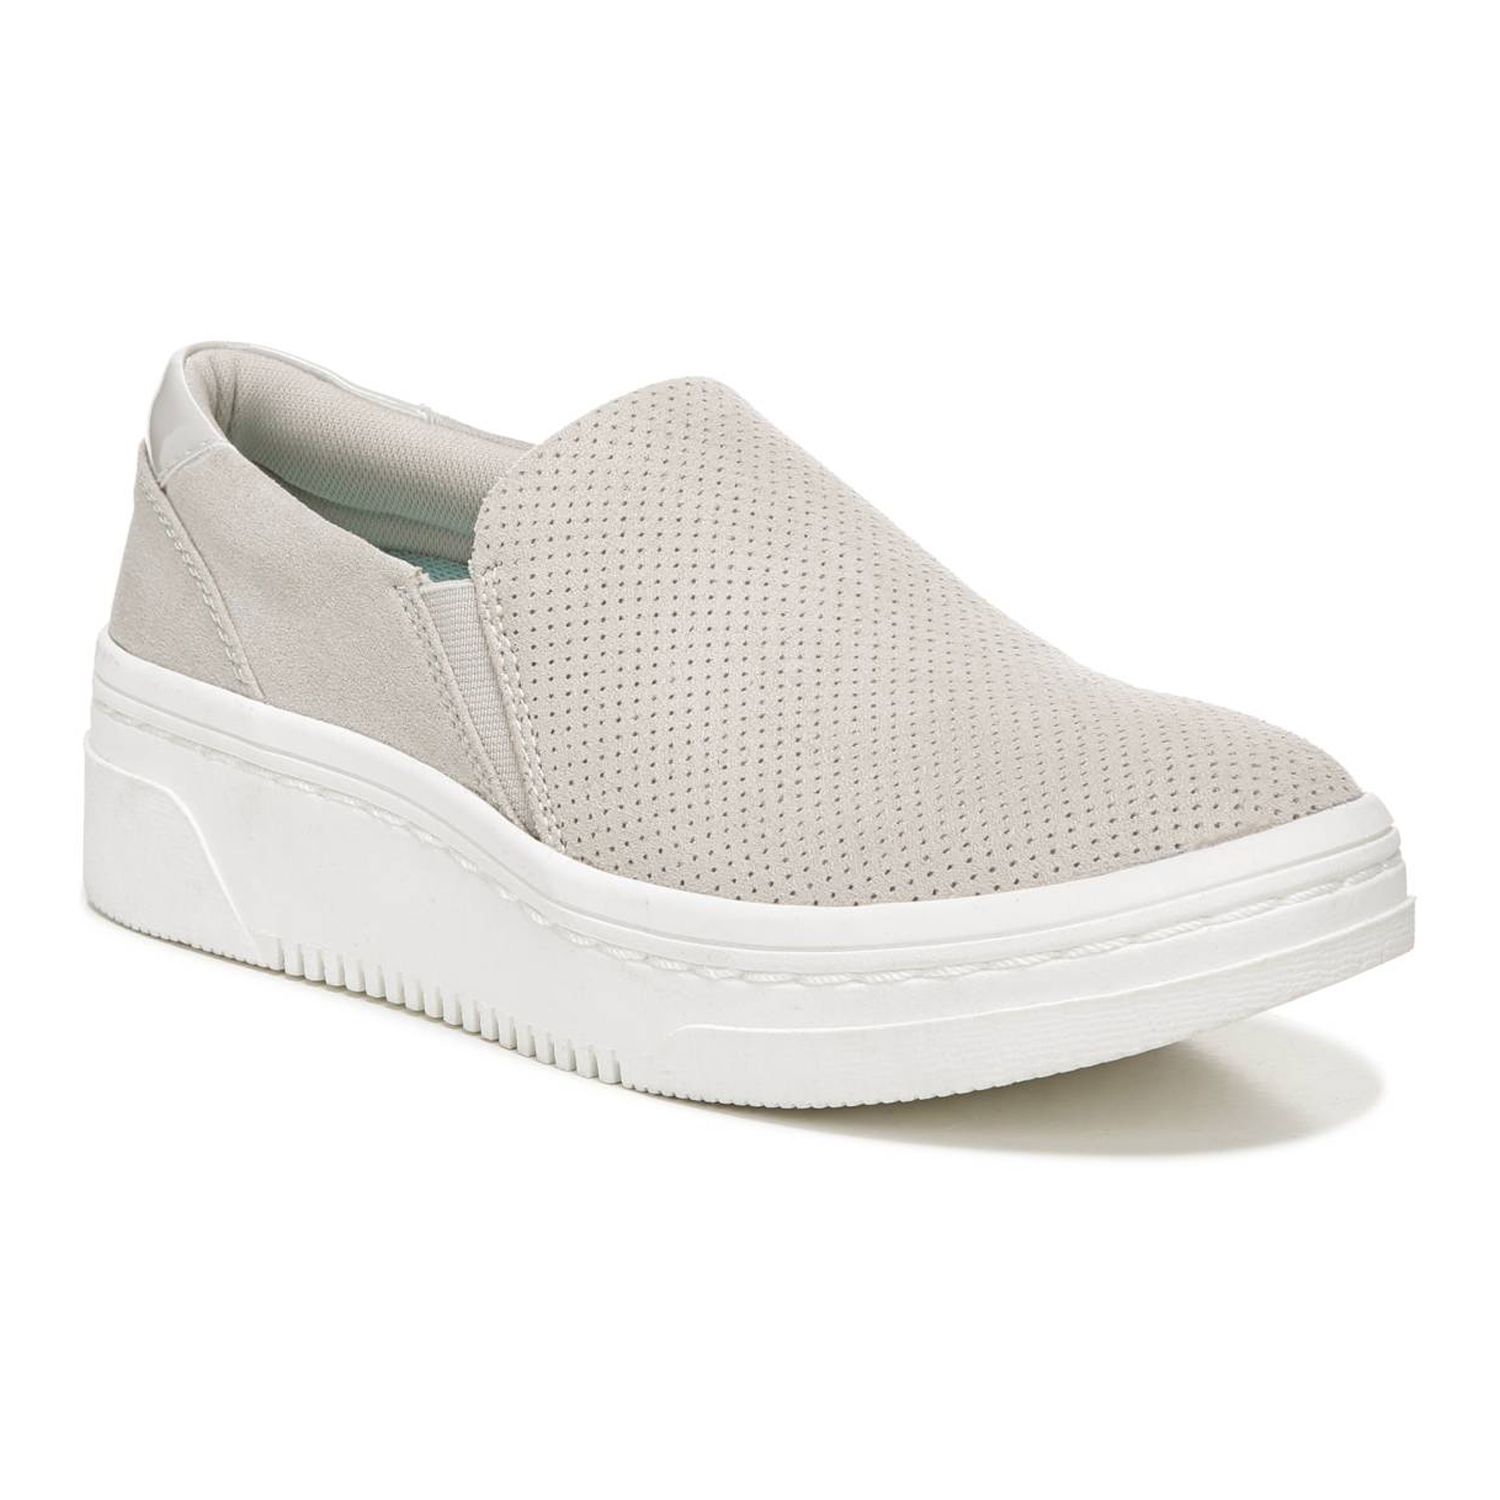 Image for Dr. Scholl's Madison Next Women's Slip-on Sneakers at Kohl's.